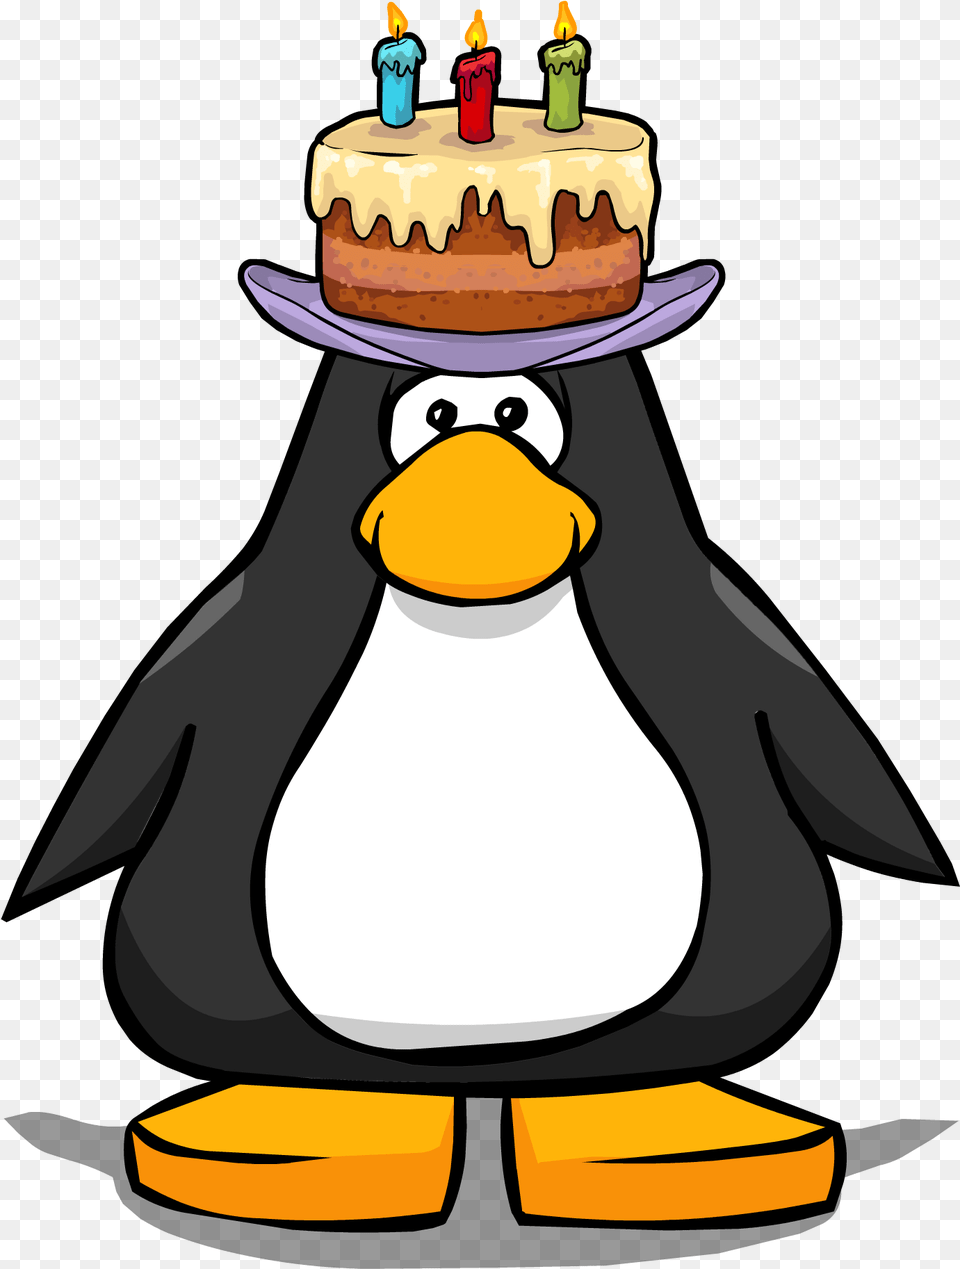 Download Hd Happy Birthday Hat Penguin Club Penguin Happy Birthday, Food, Birthday Cake, Cake, Cream Free Png